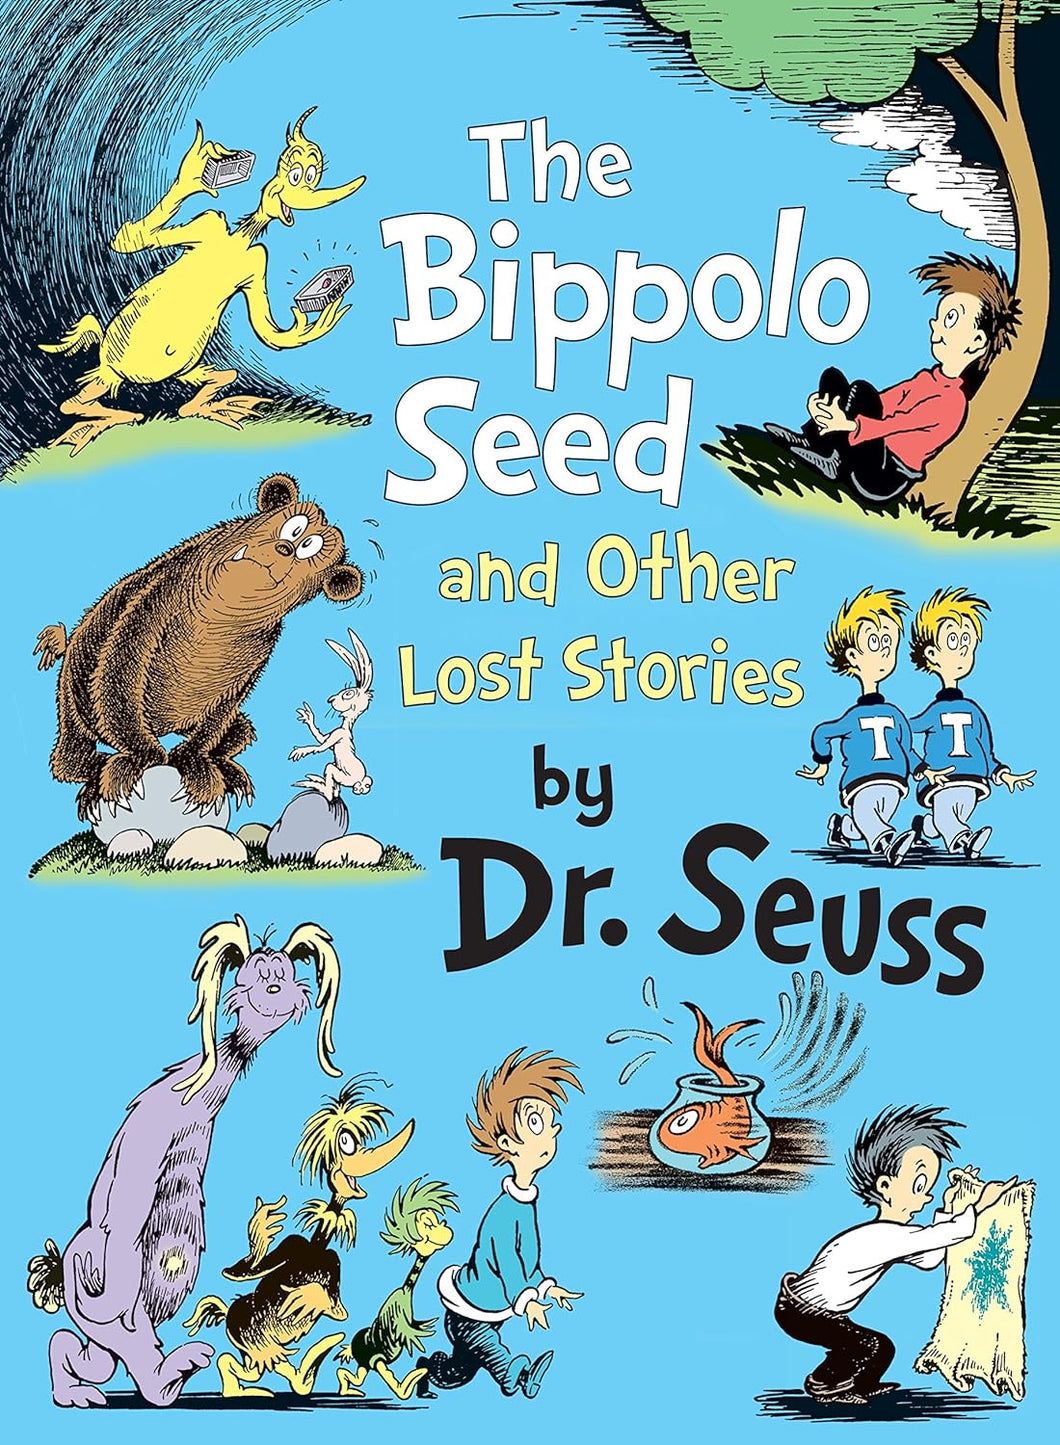 The Bippolo Seed and Other Lost Stories by Dr Seuss